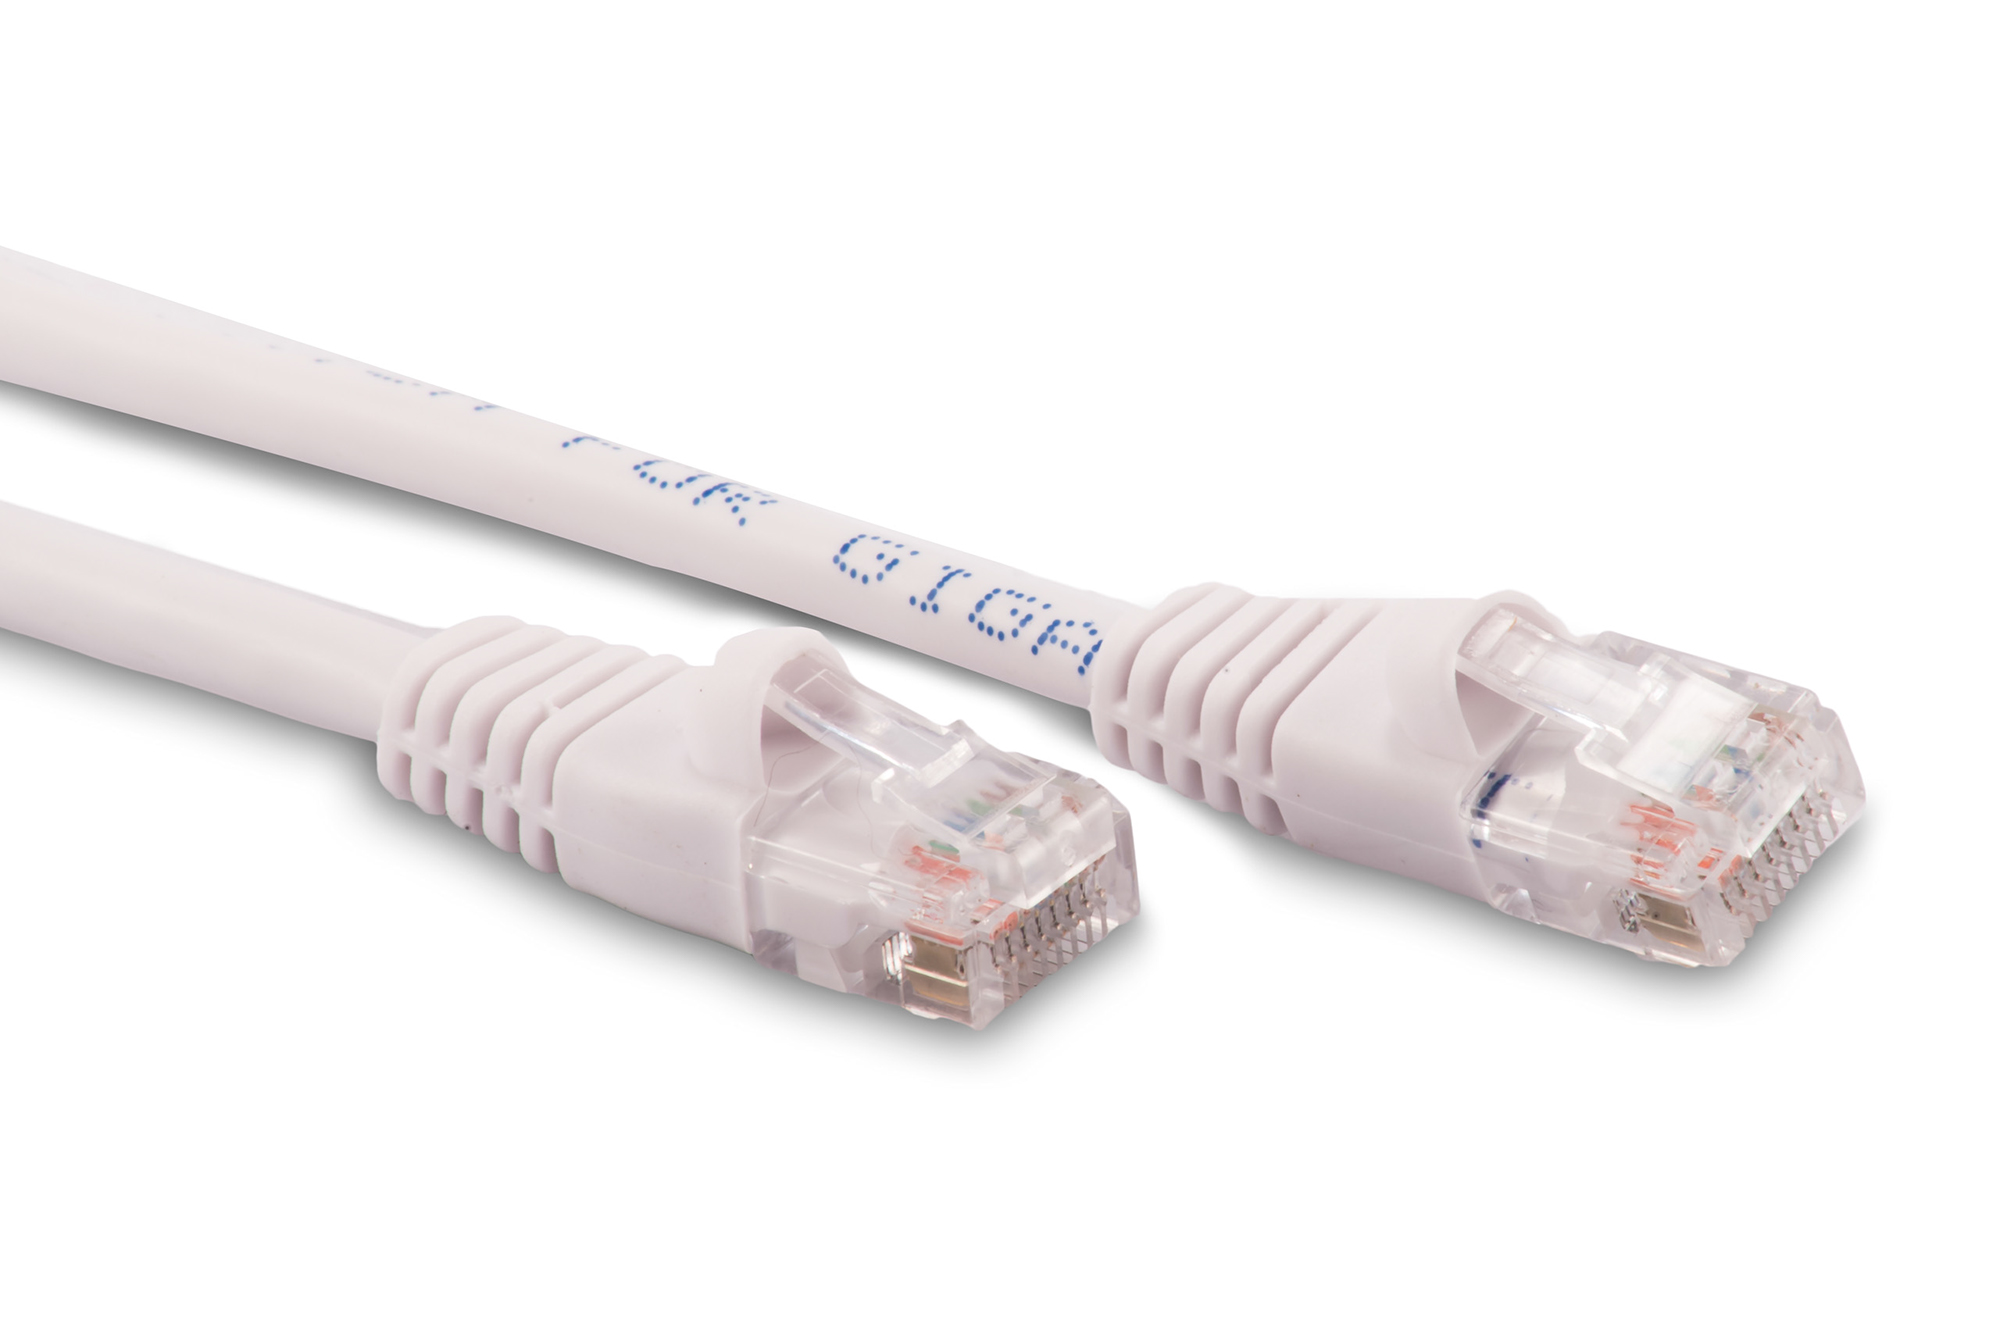 10ft Cat6 Ethernet Patch Cable - White Color - Snagless Boot, Stranded, RJ45, 550Mhz, 24AWG